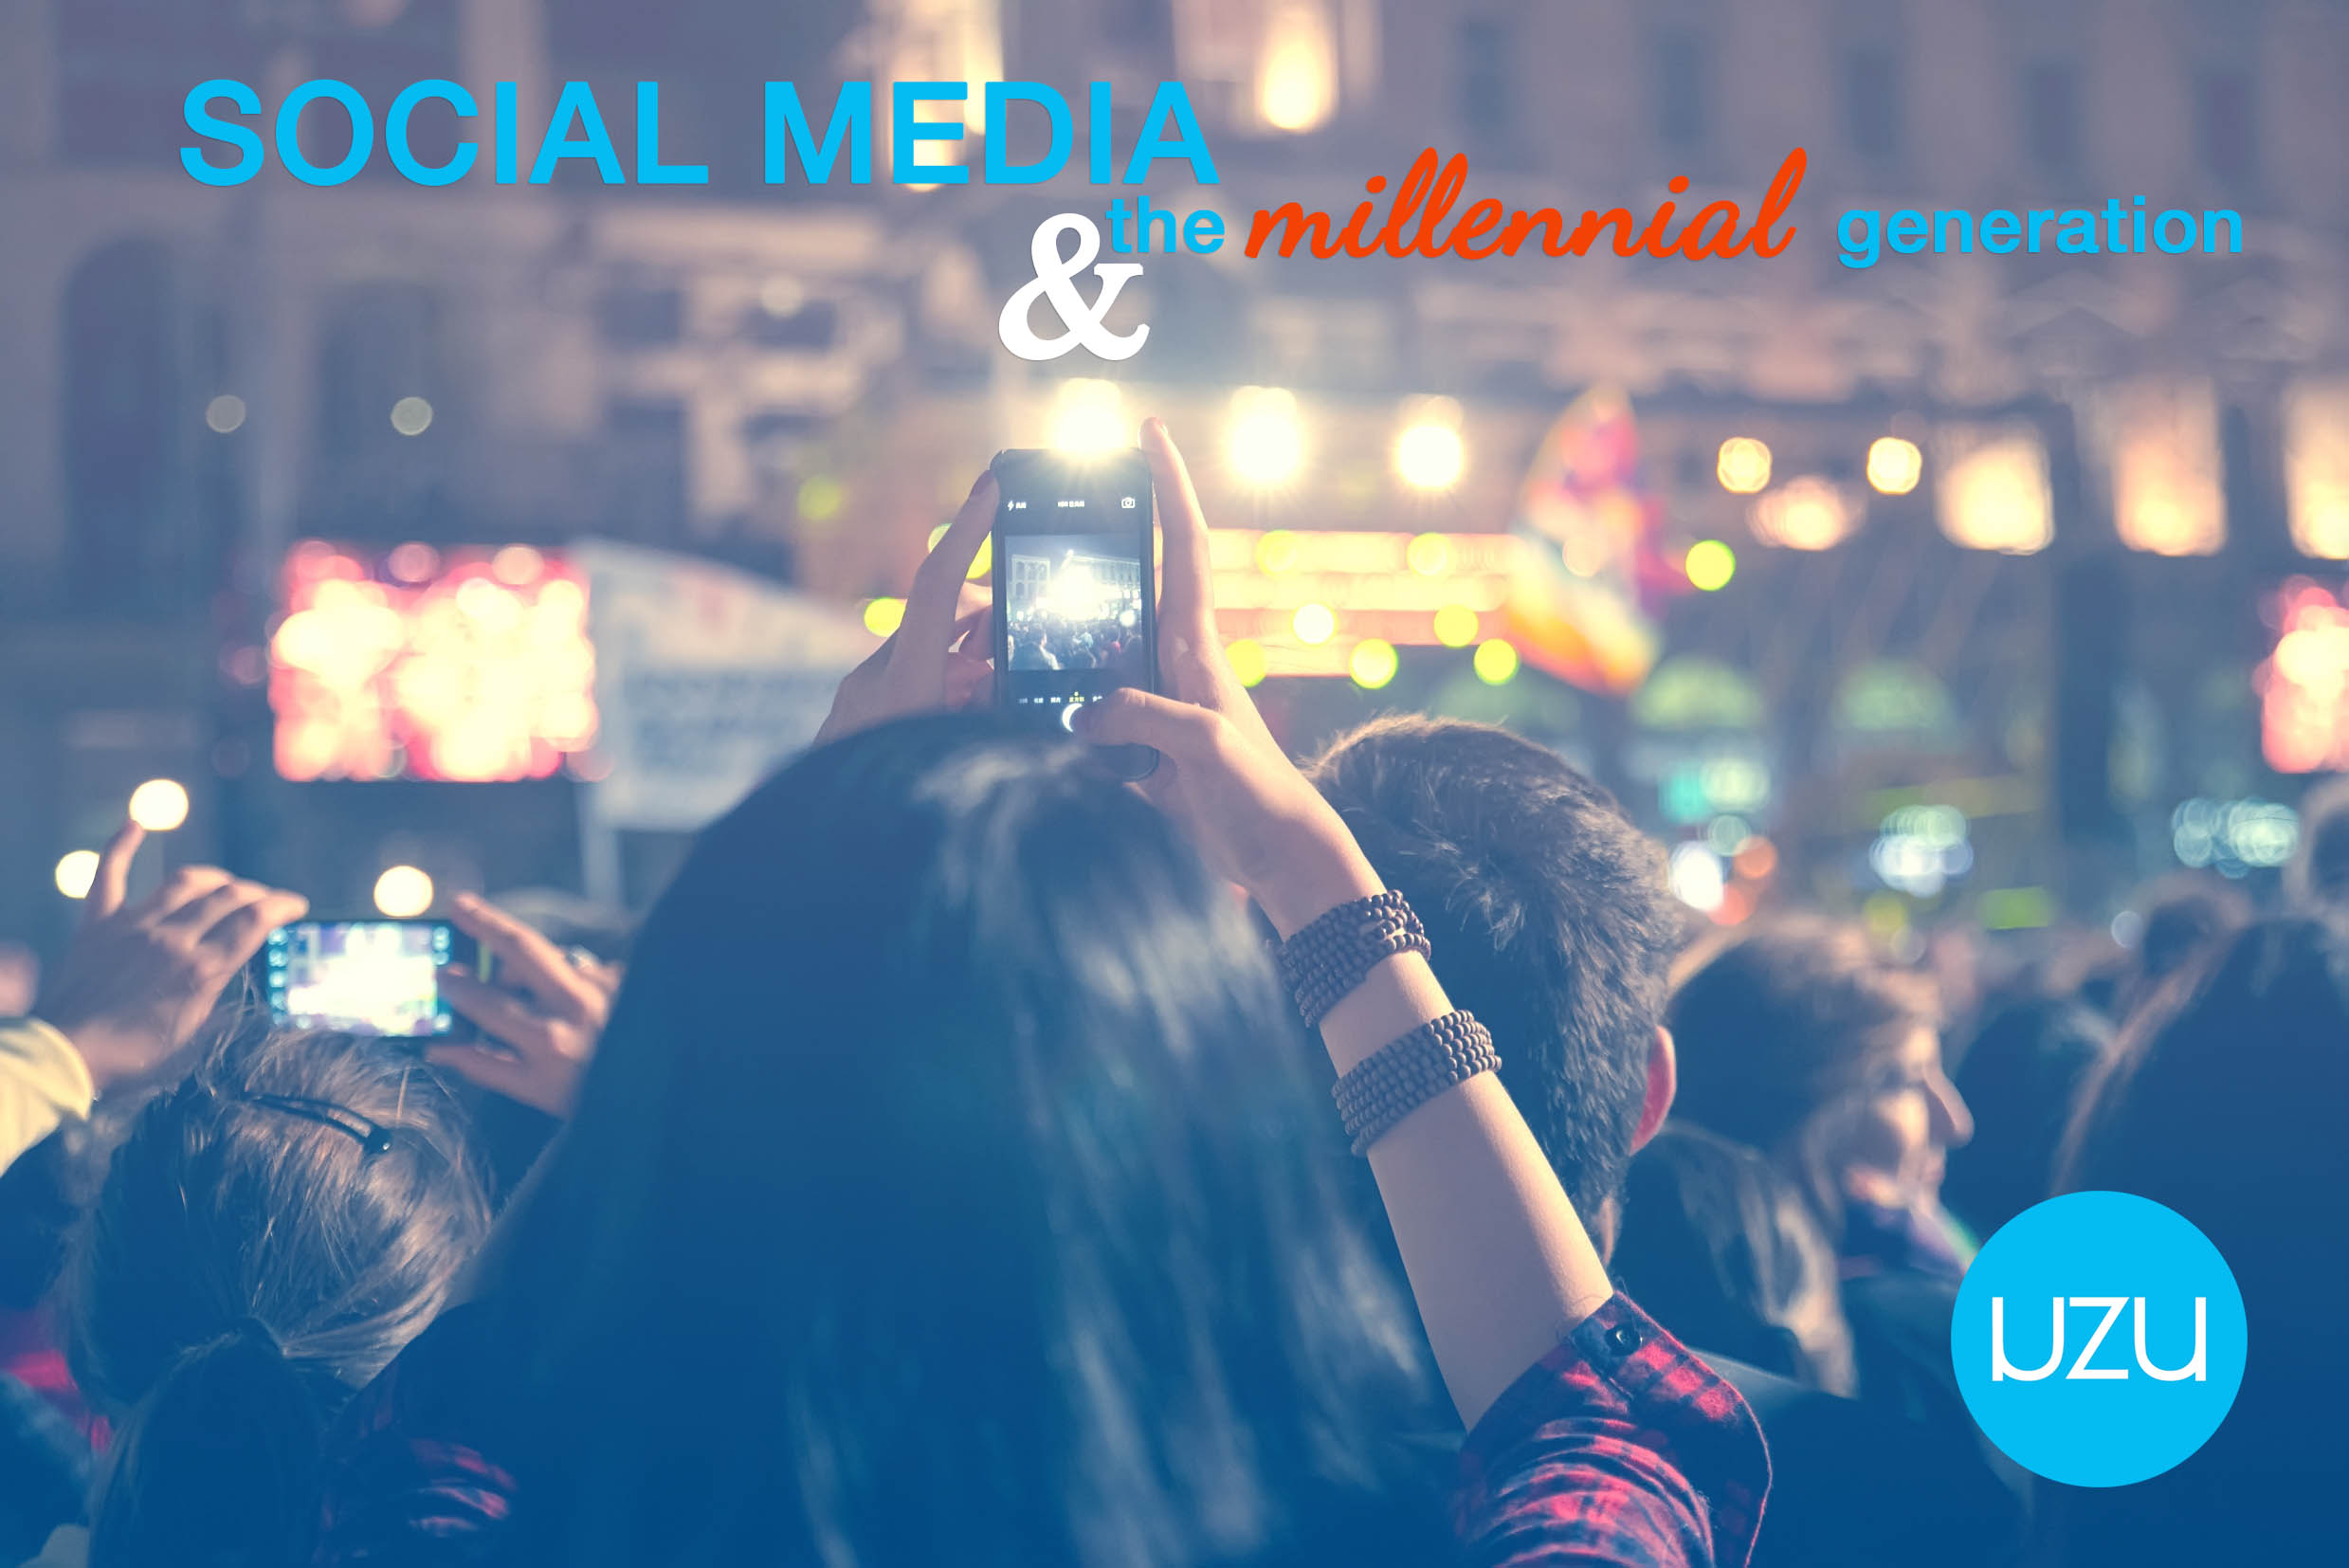 Social Media and the Millennial Generation